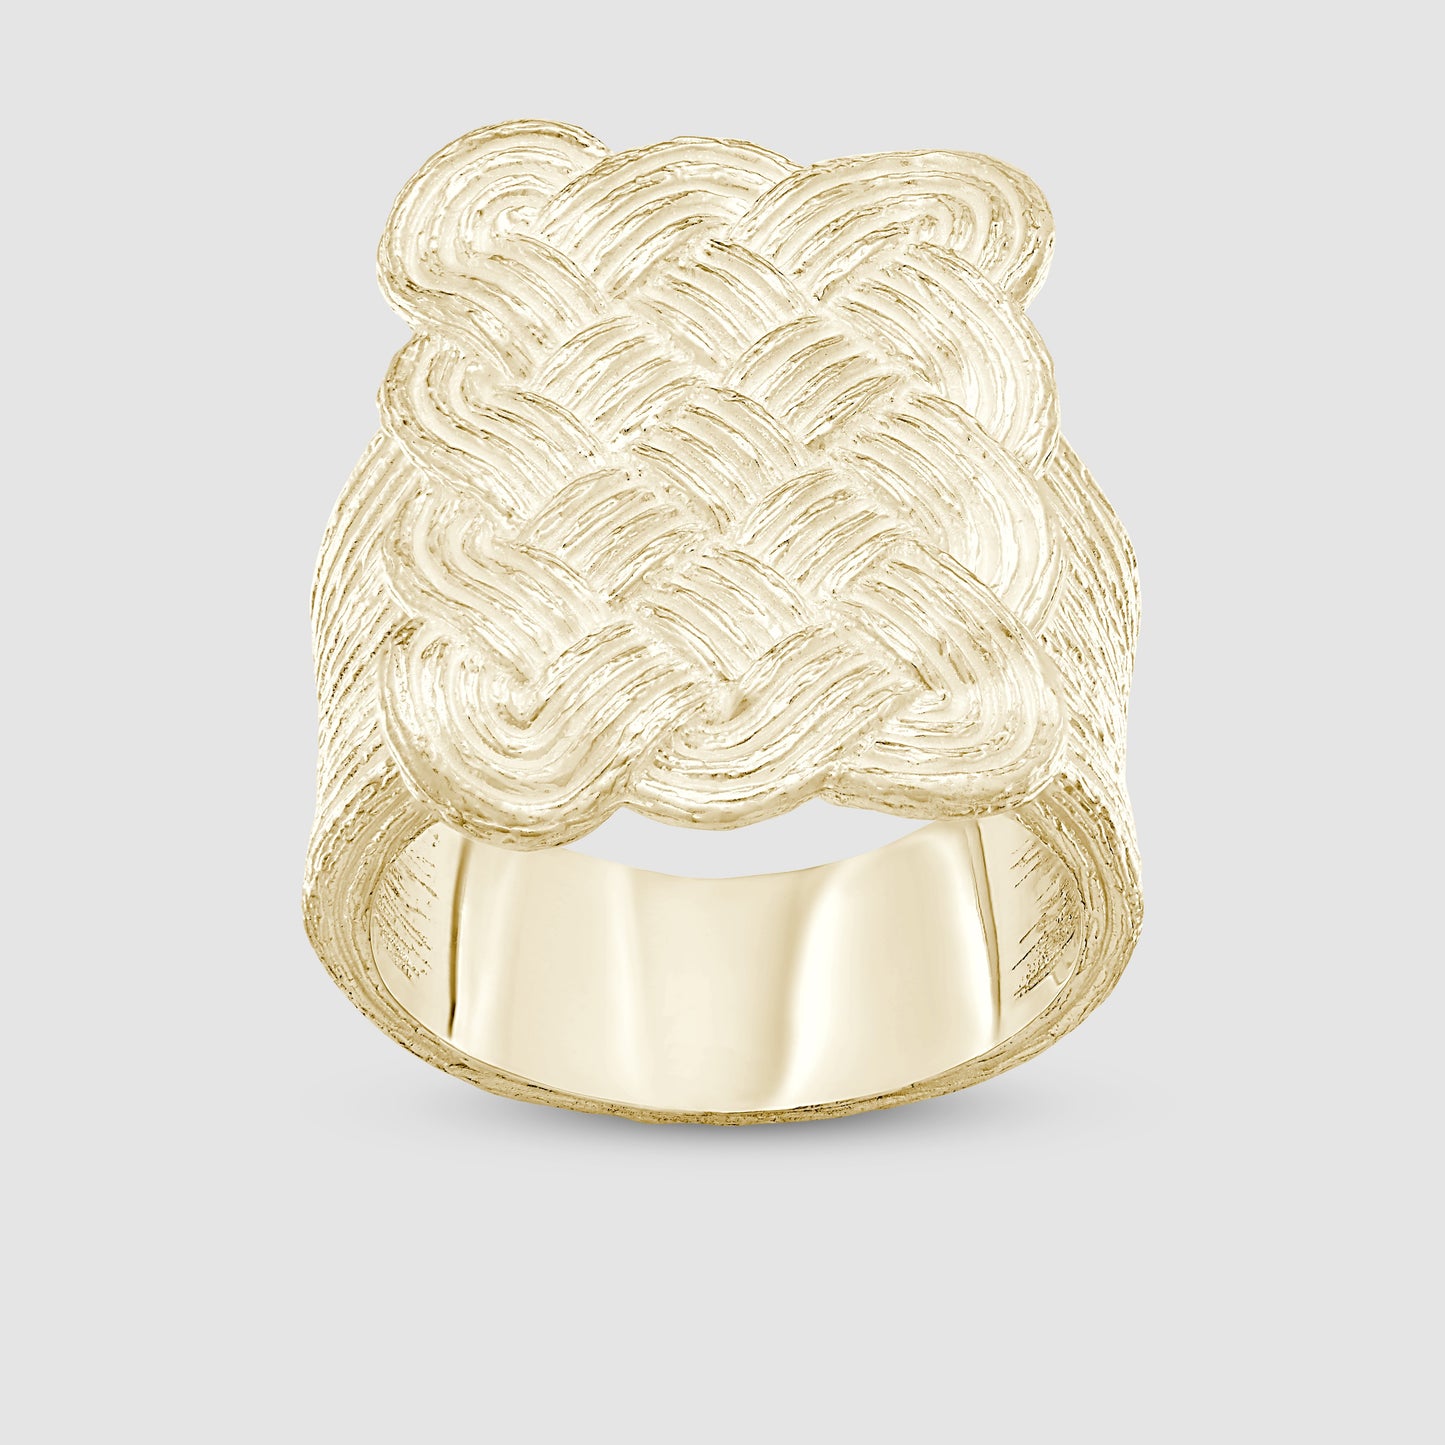 Woven Willow Ring - Gold